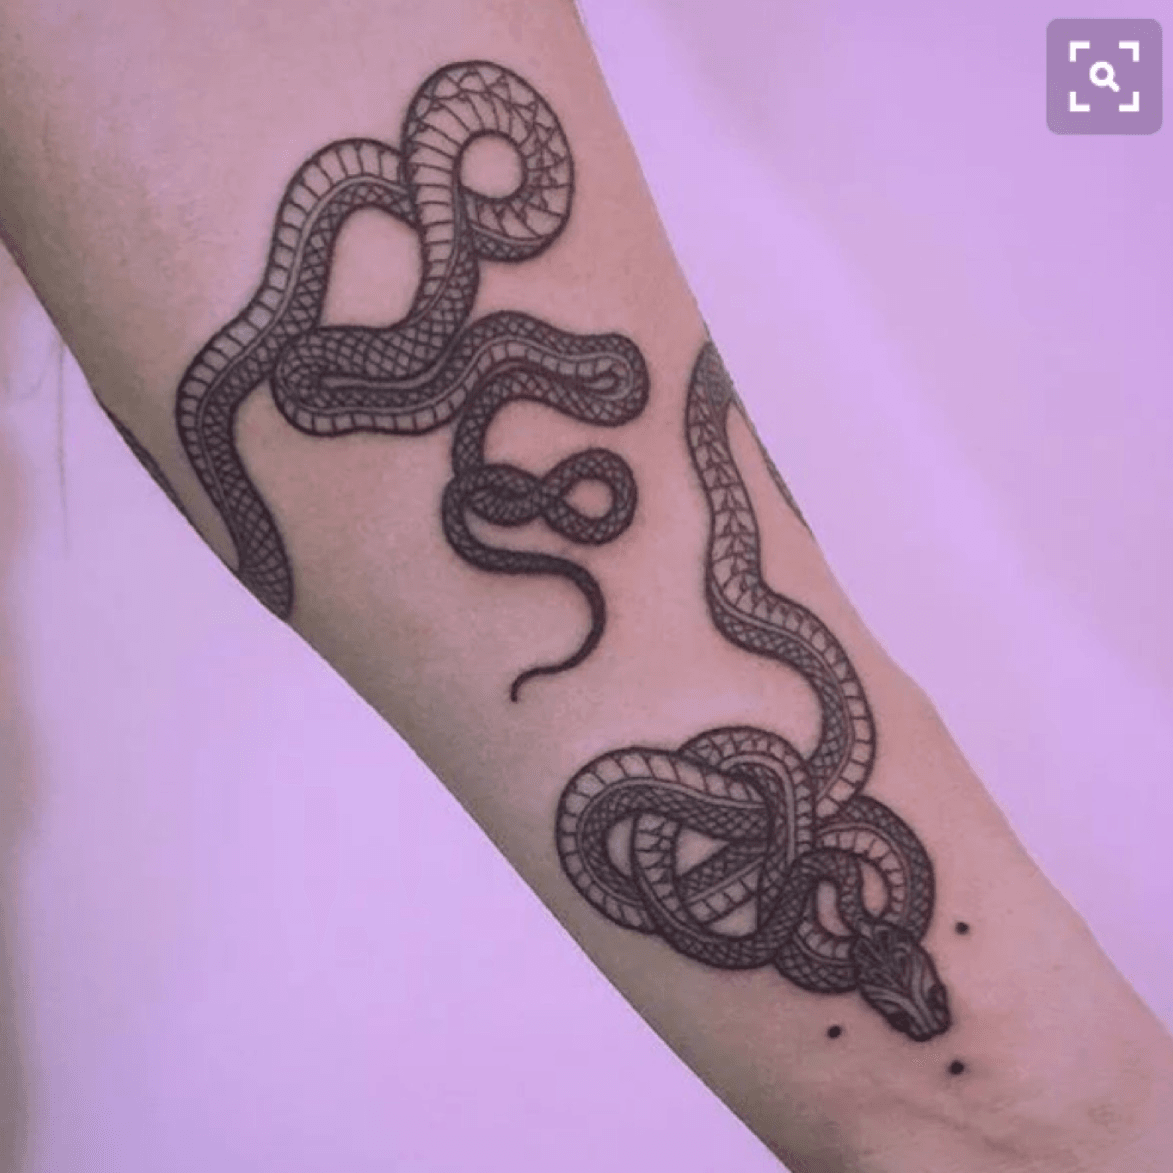 Large snake tattoo located on the thigh